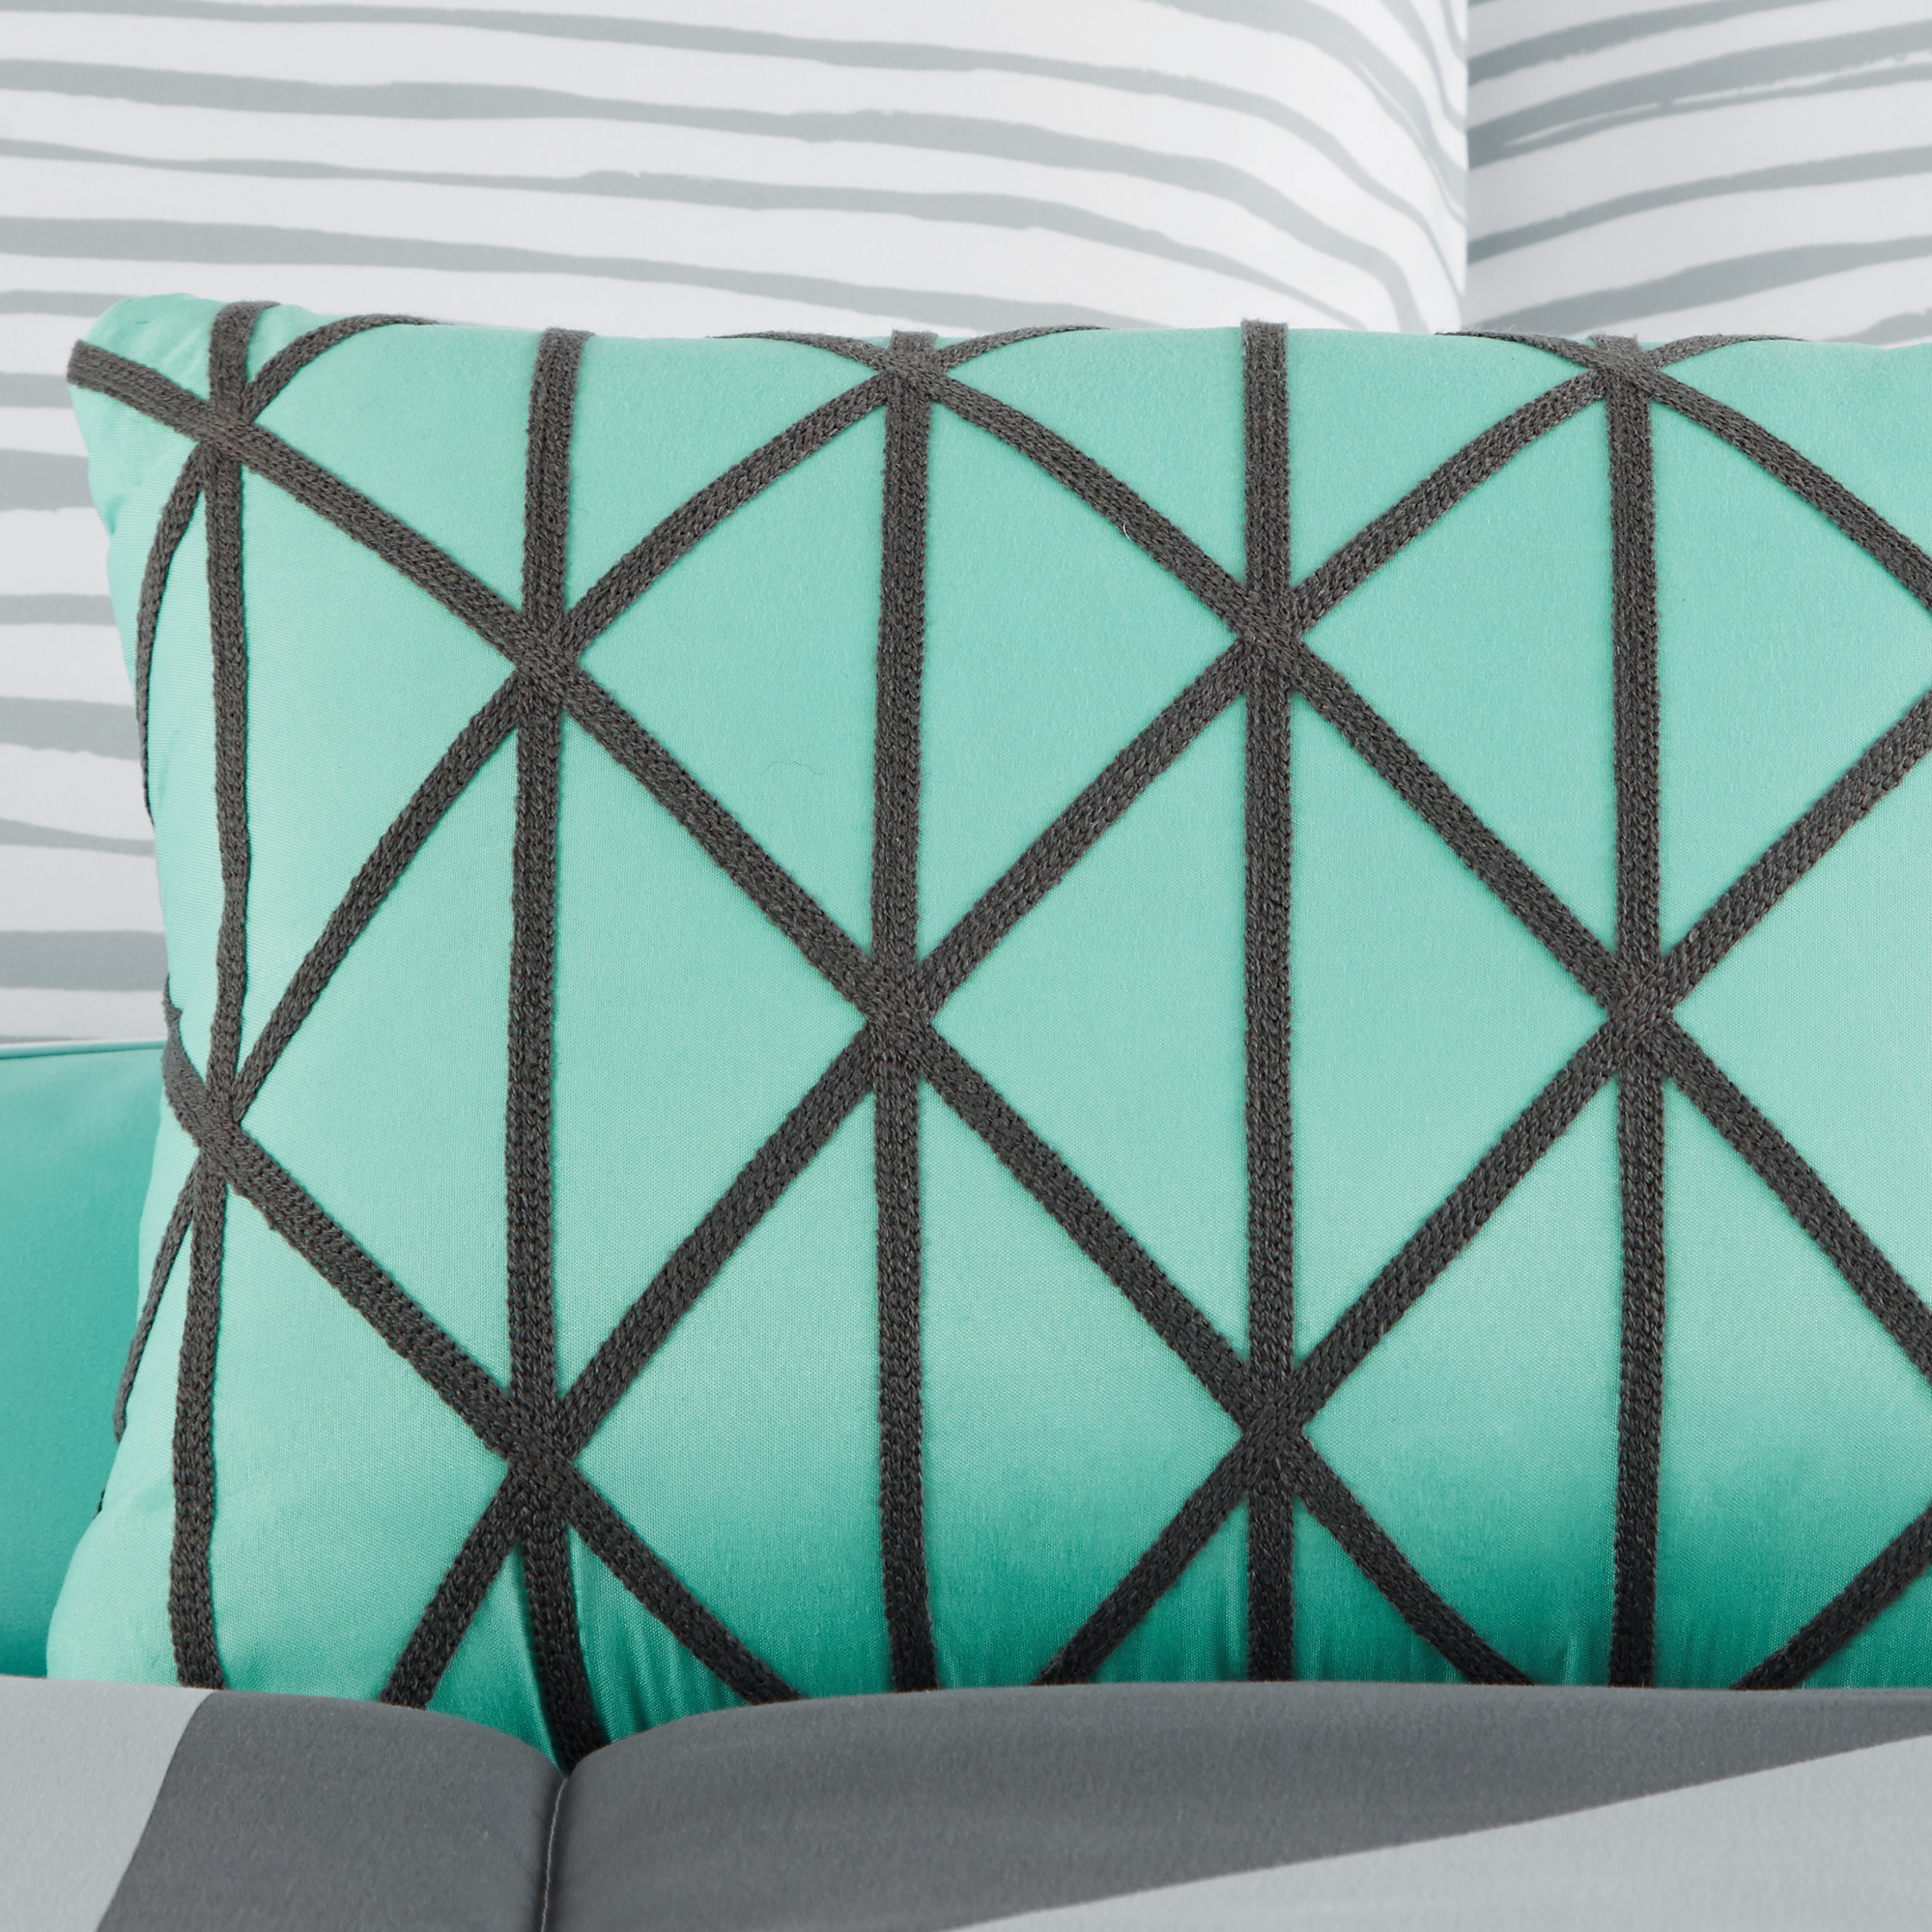 Mainstays Gray and Teal Geometric 8 Piece Bed in a Bag Comforter Set With Sheets, Queen - image 5 of 8